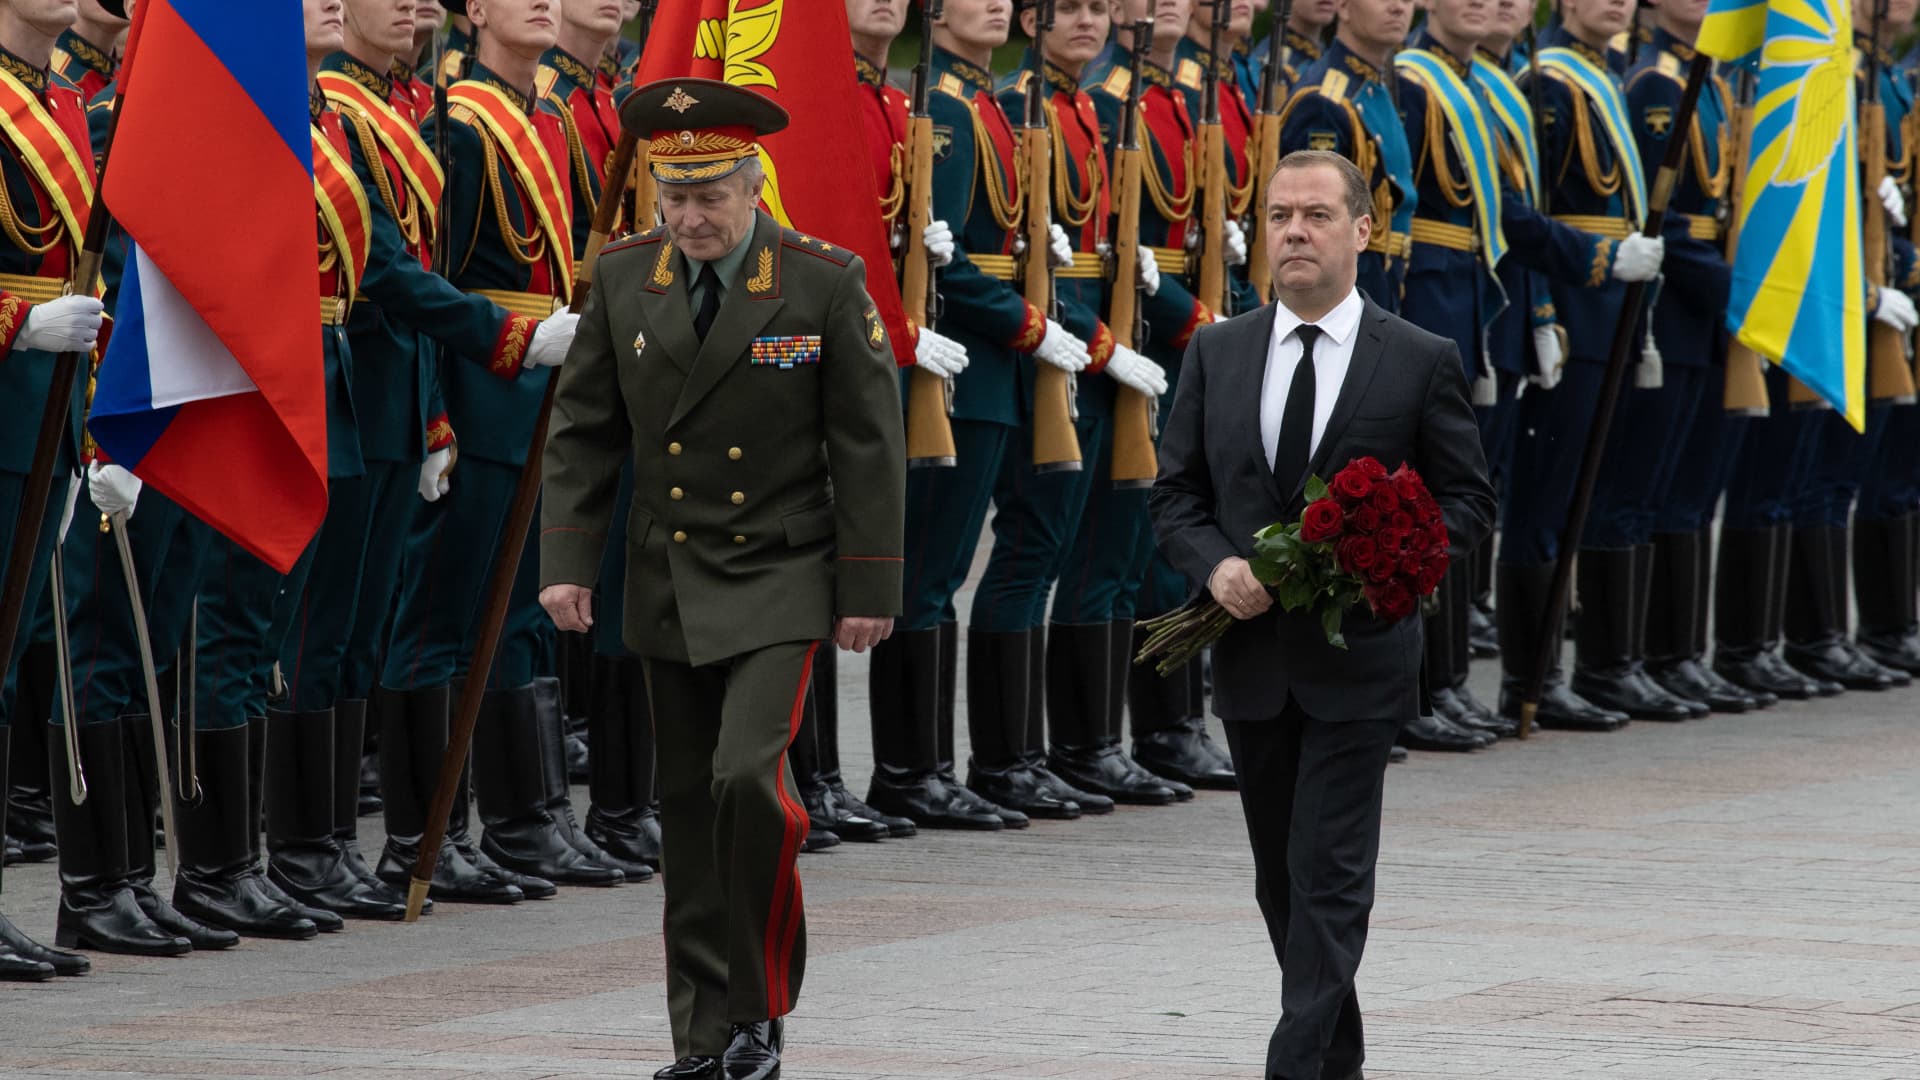 Deputy chairman of the Russian Security Council Dmitry Medvedev attends a wreath-laying ceremony at the Tomb of the Unknown Soldier in the Alexandrovsky Garden near the Kremlin wall in Moscow on June 22, 2022.